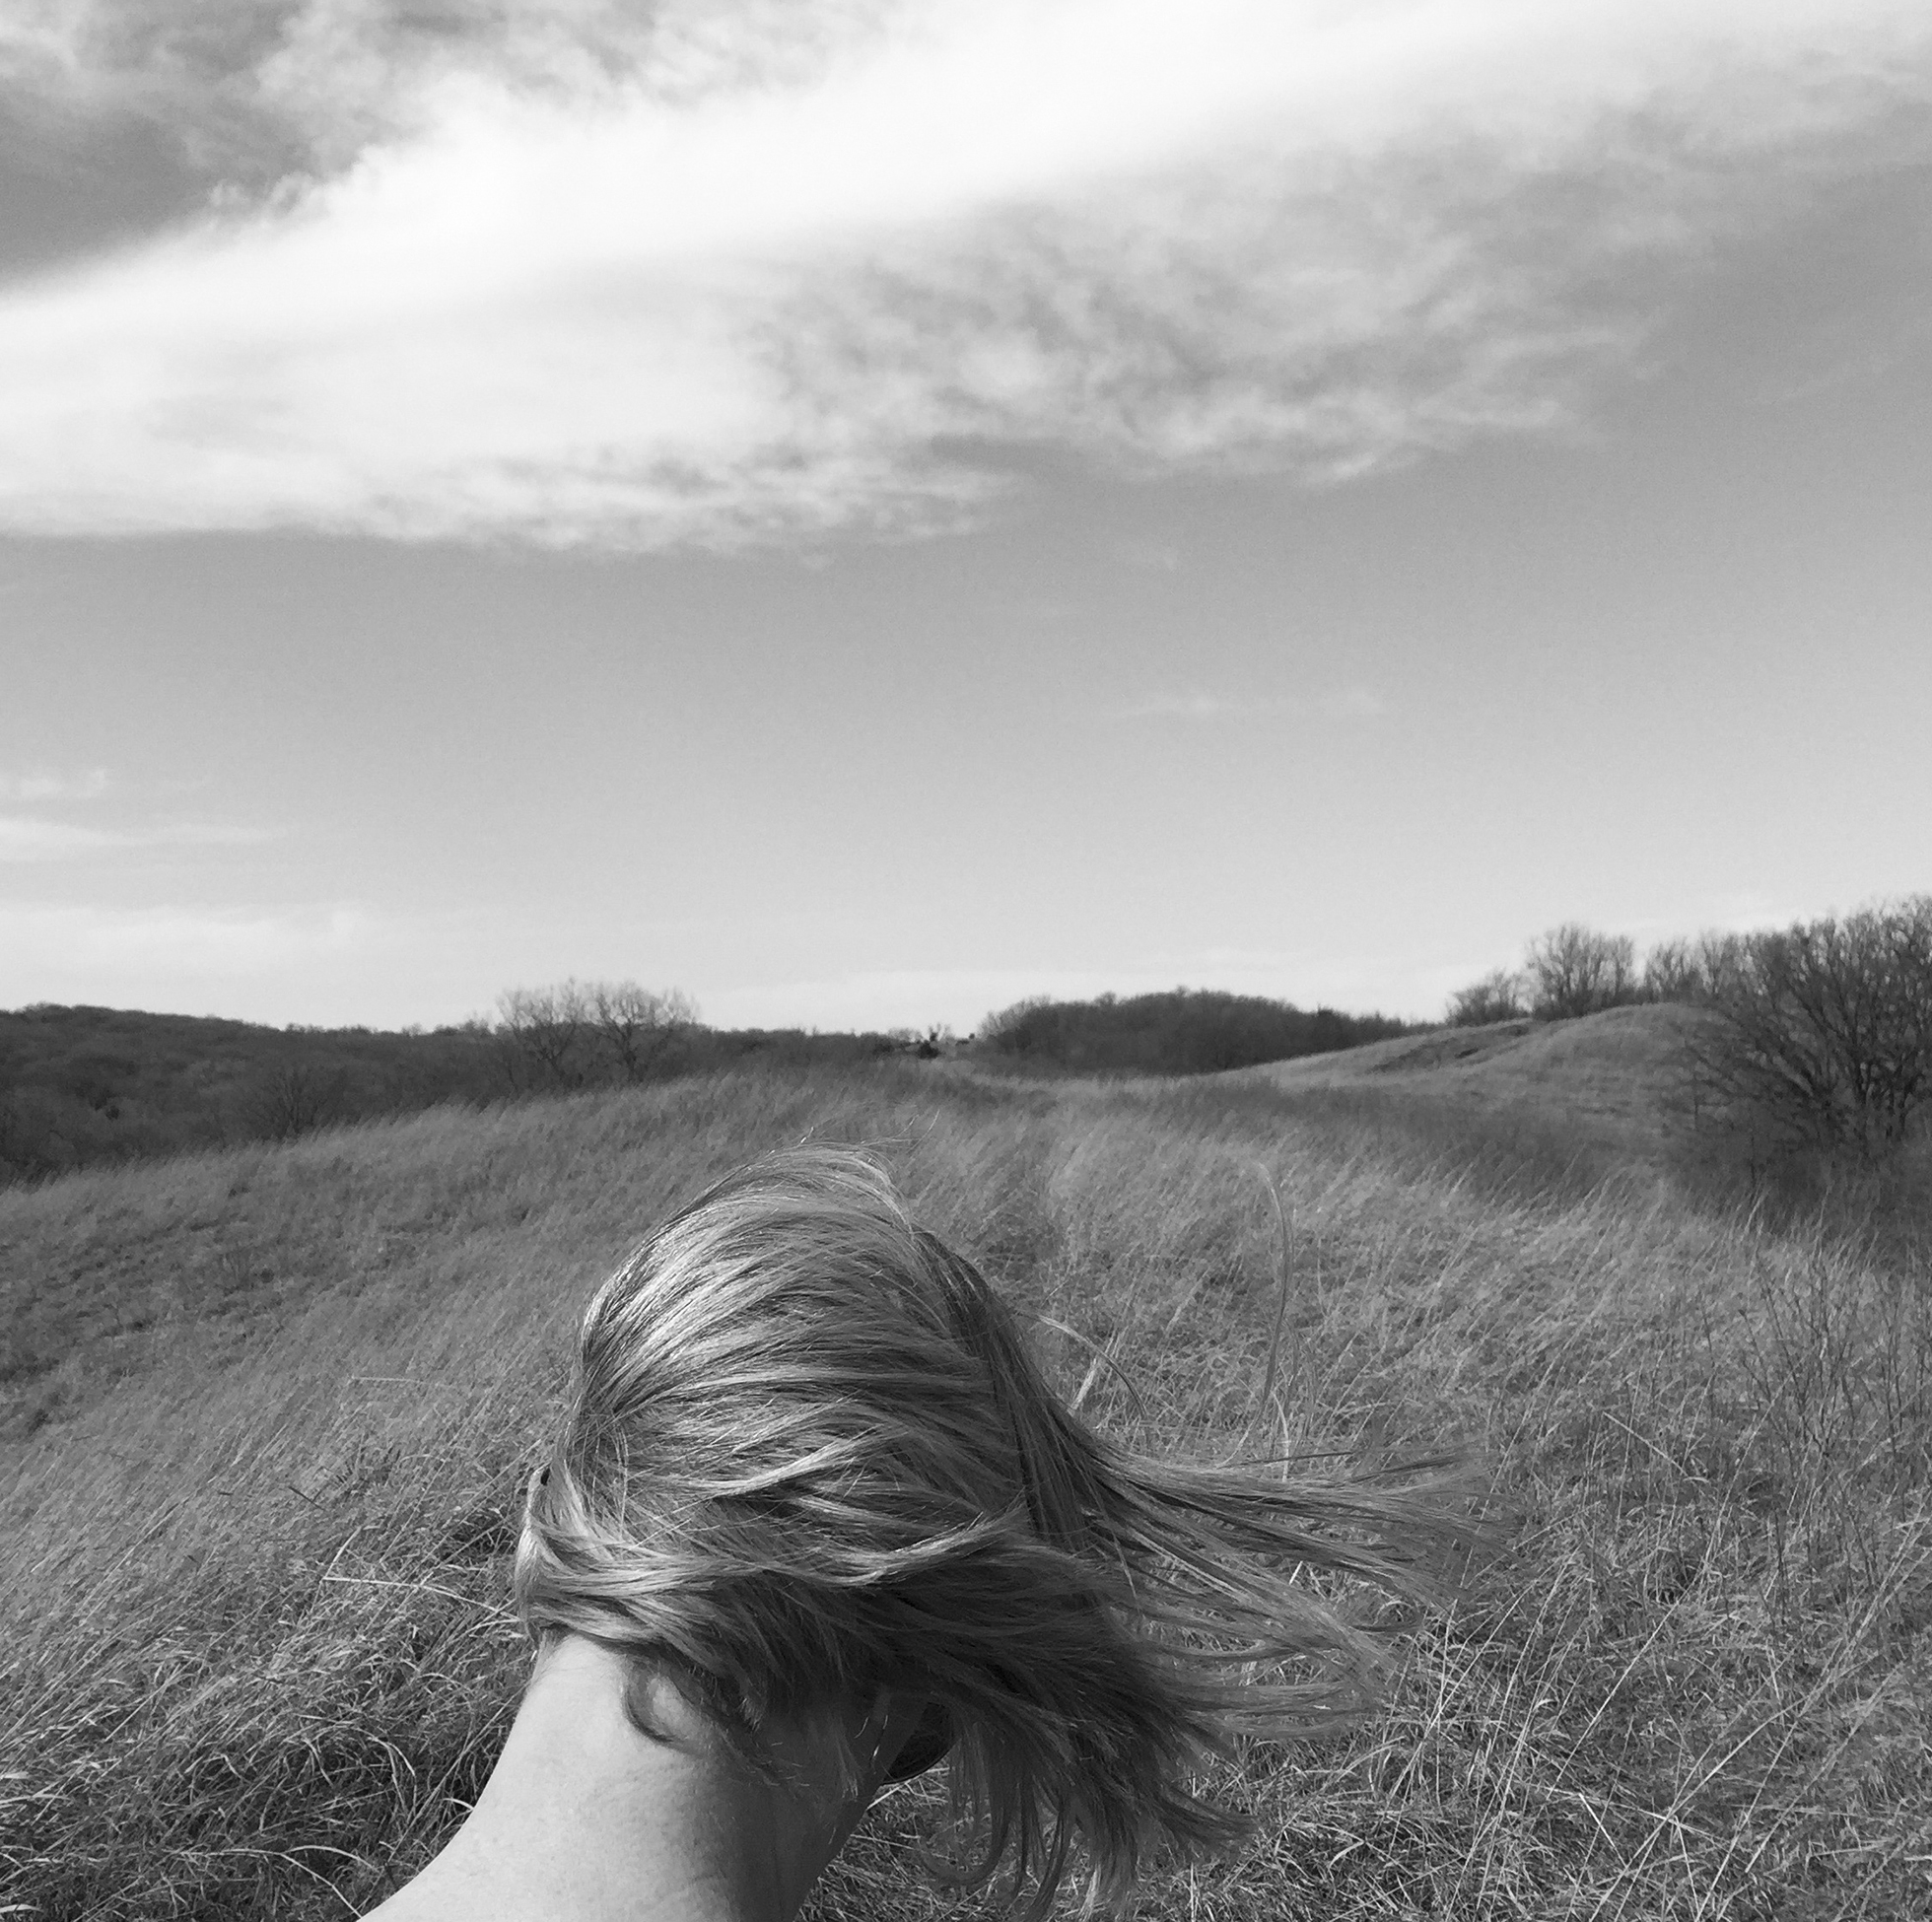 The back of a person’s head as they look out toward a field. The wind is blowing their hair to the right.